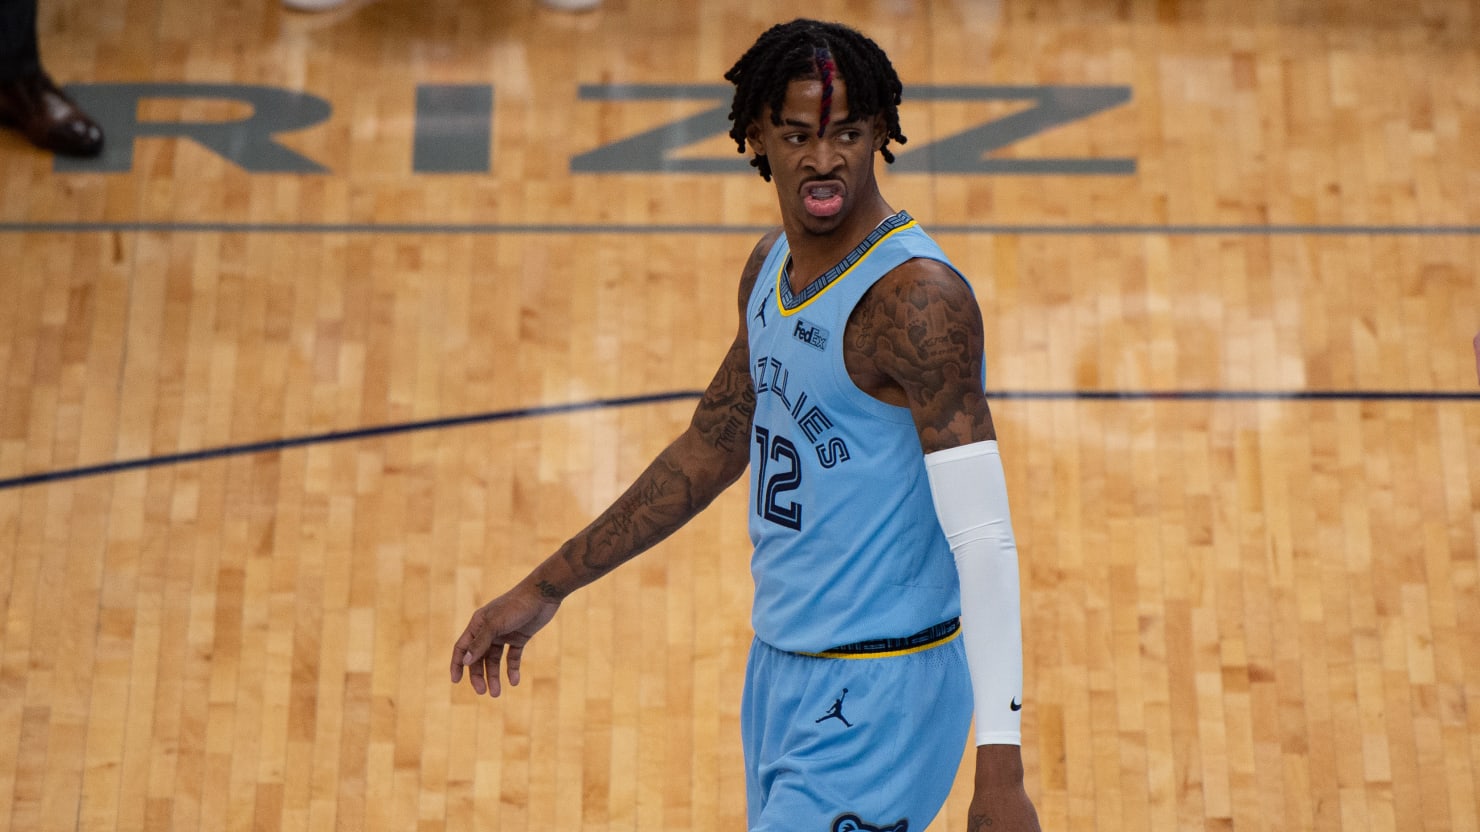 JA MORANT FLASHES A GUN PARTYING!!! THE VIDEO THAT HAS THE WHOLE WORLD  TALKING!!! 